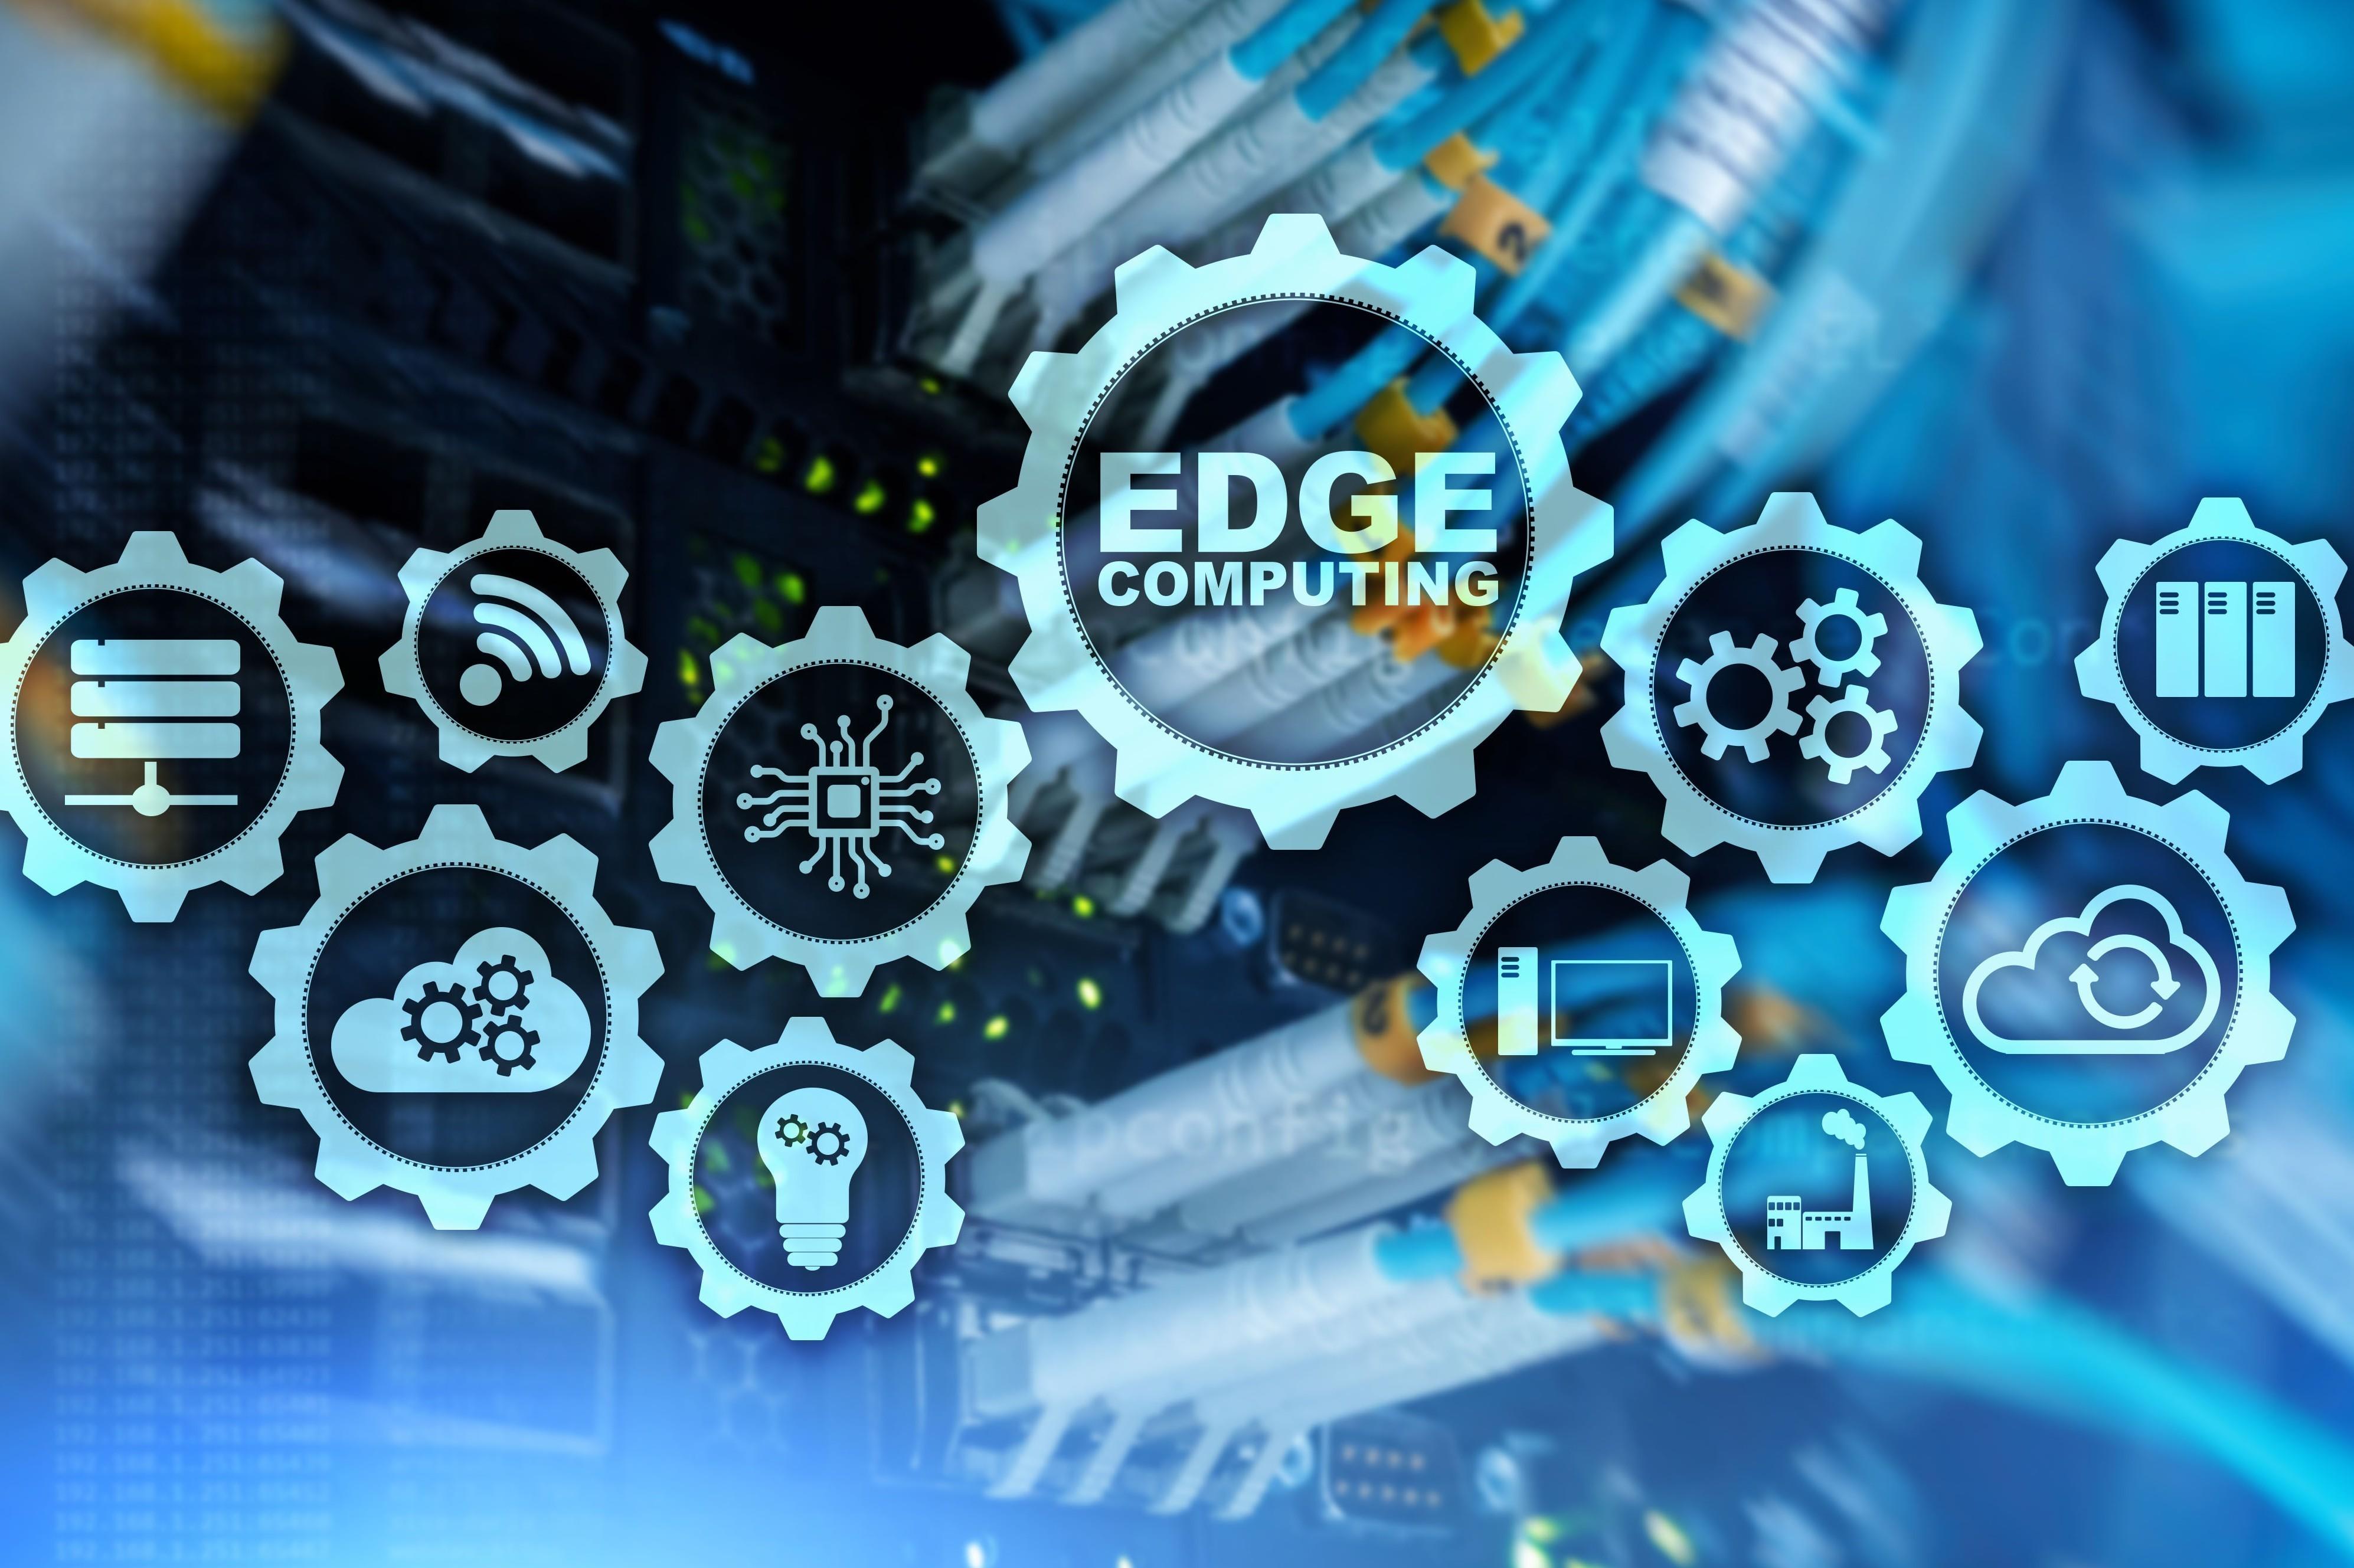 EDGE COMPUTING on modern server room background. Information technology and business concept for resource intensive distributed computing